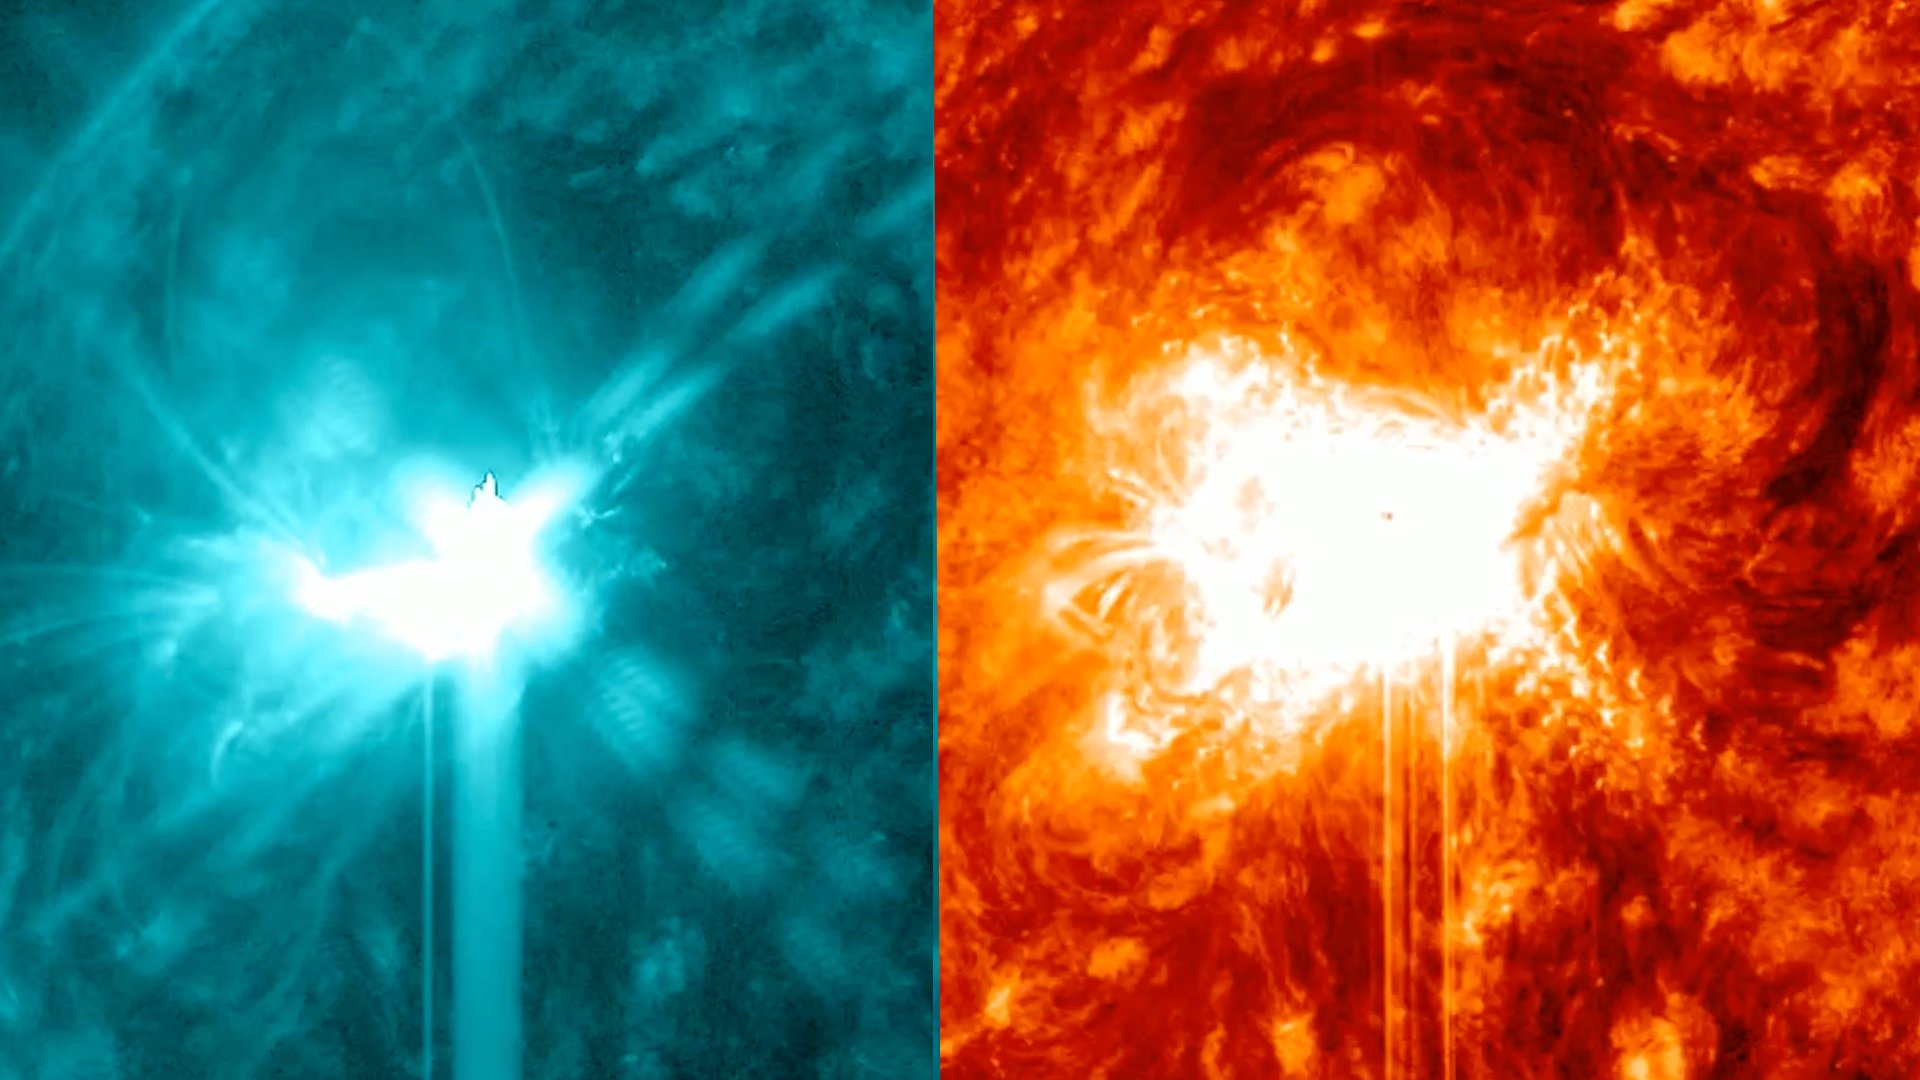 Powerful twin solar flares erupt from sun as cell phone outages spike across US (video)